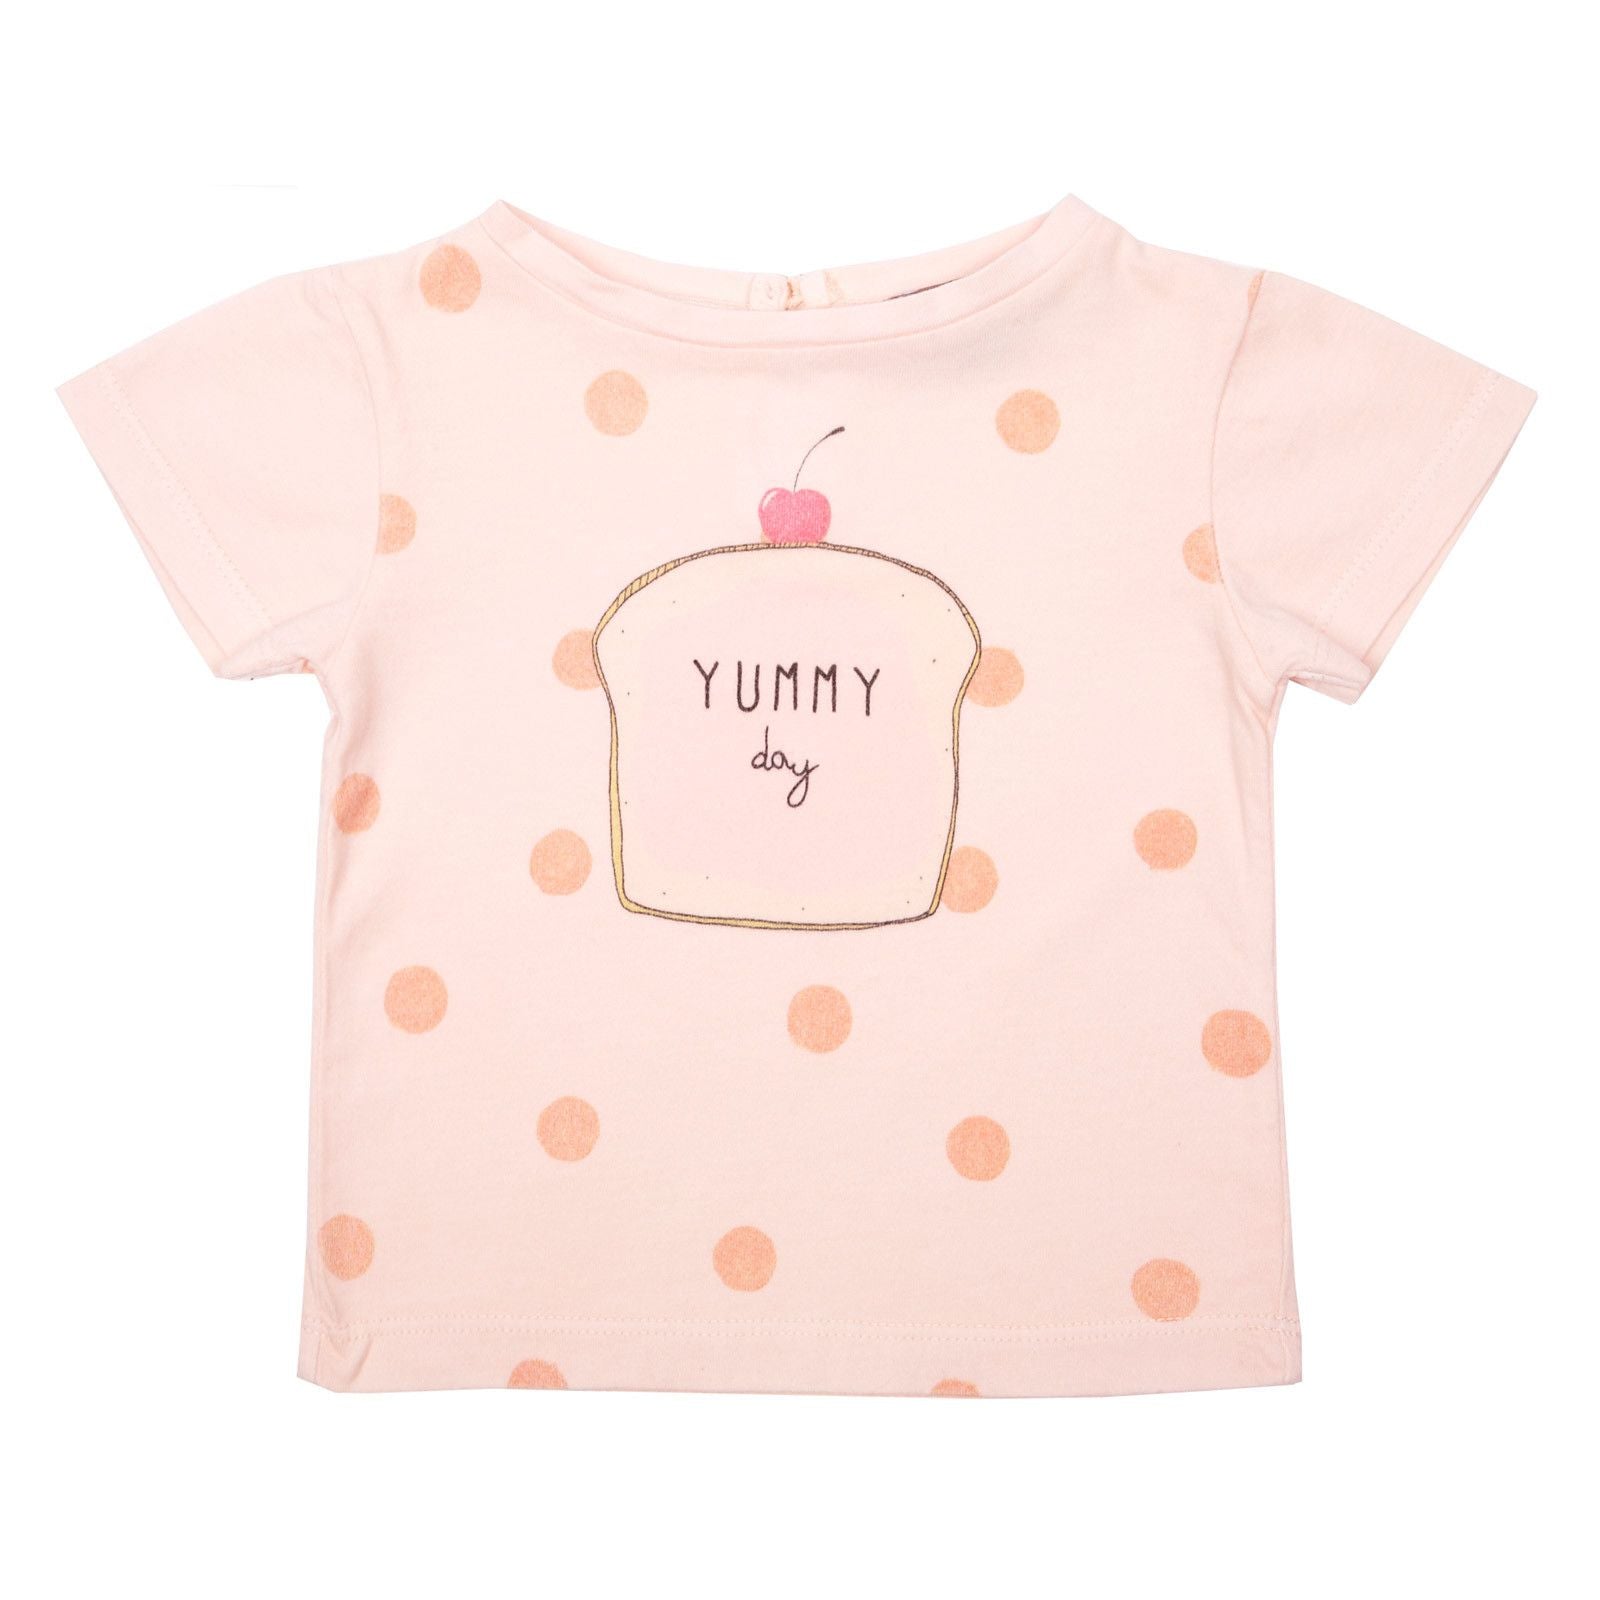 Girls Pink Bread Printed T-Shirt With Spot Trims - CÉMAROSE | Children's Fashion Store